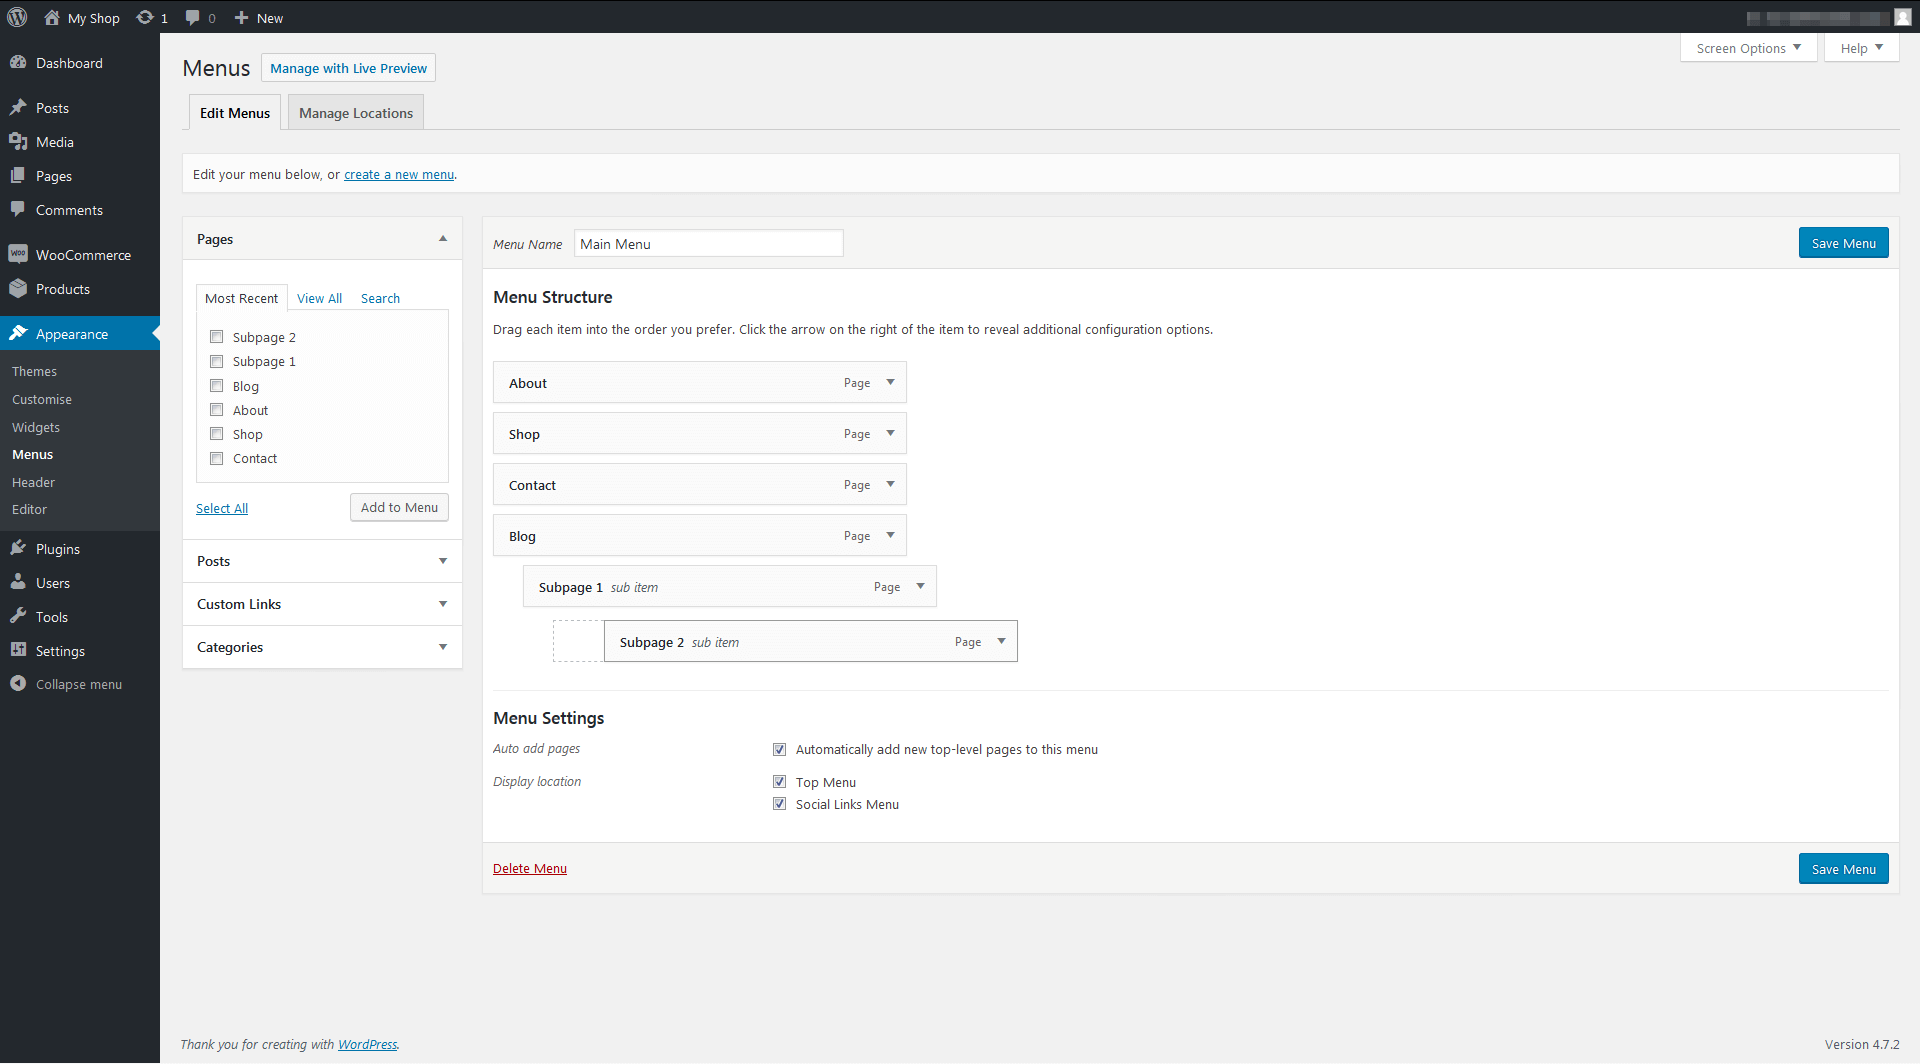 WooCommerce plugin: settings for the menu structure